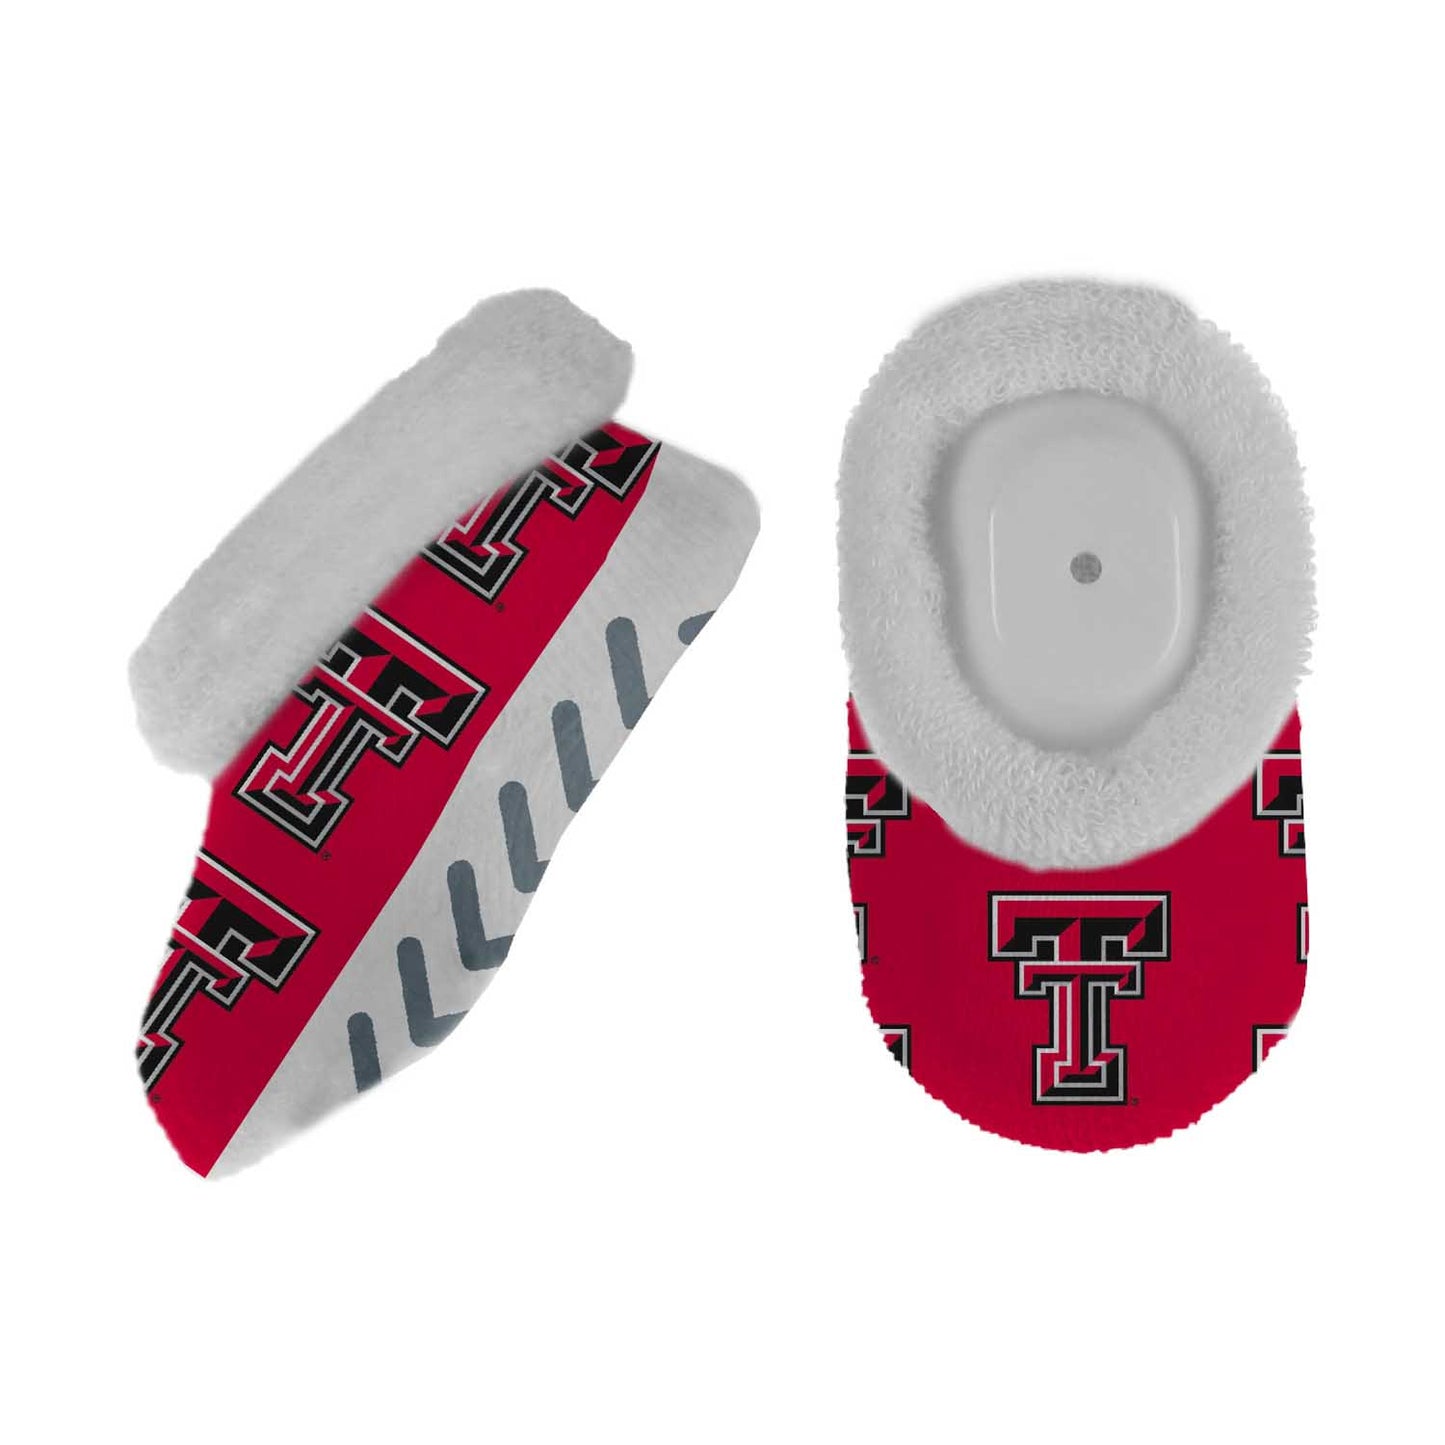 Texas Tech Red Raiders College Baby Booties Infant Boys Girls Cozy Slipper Socks - Red